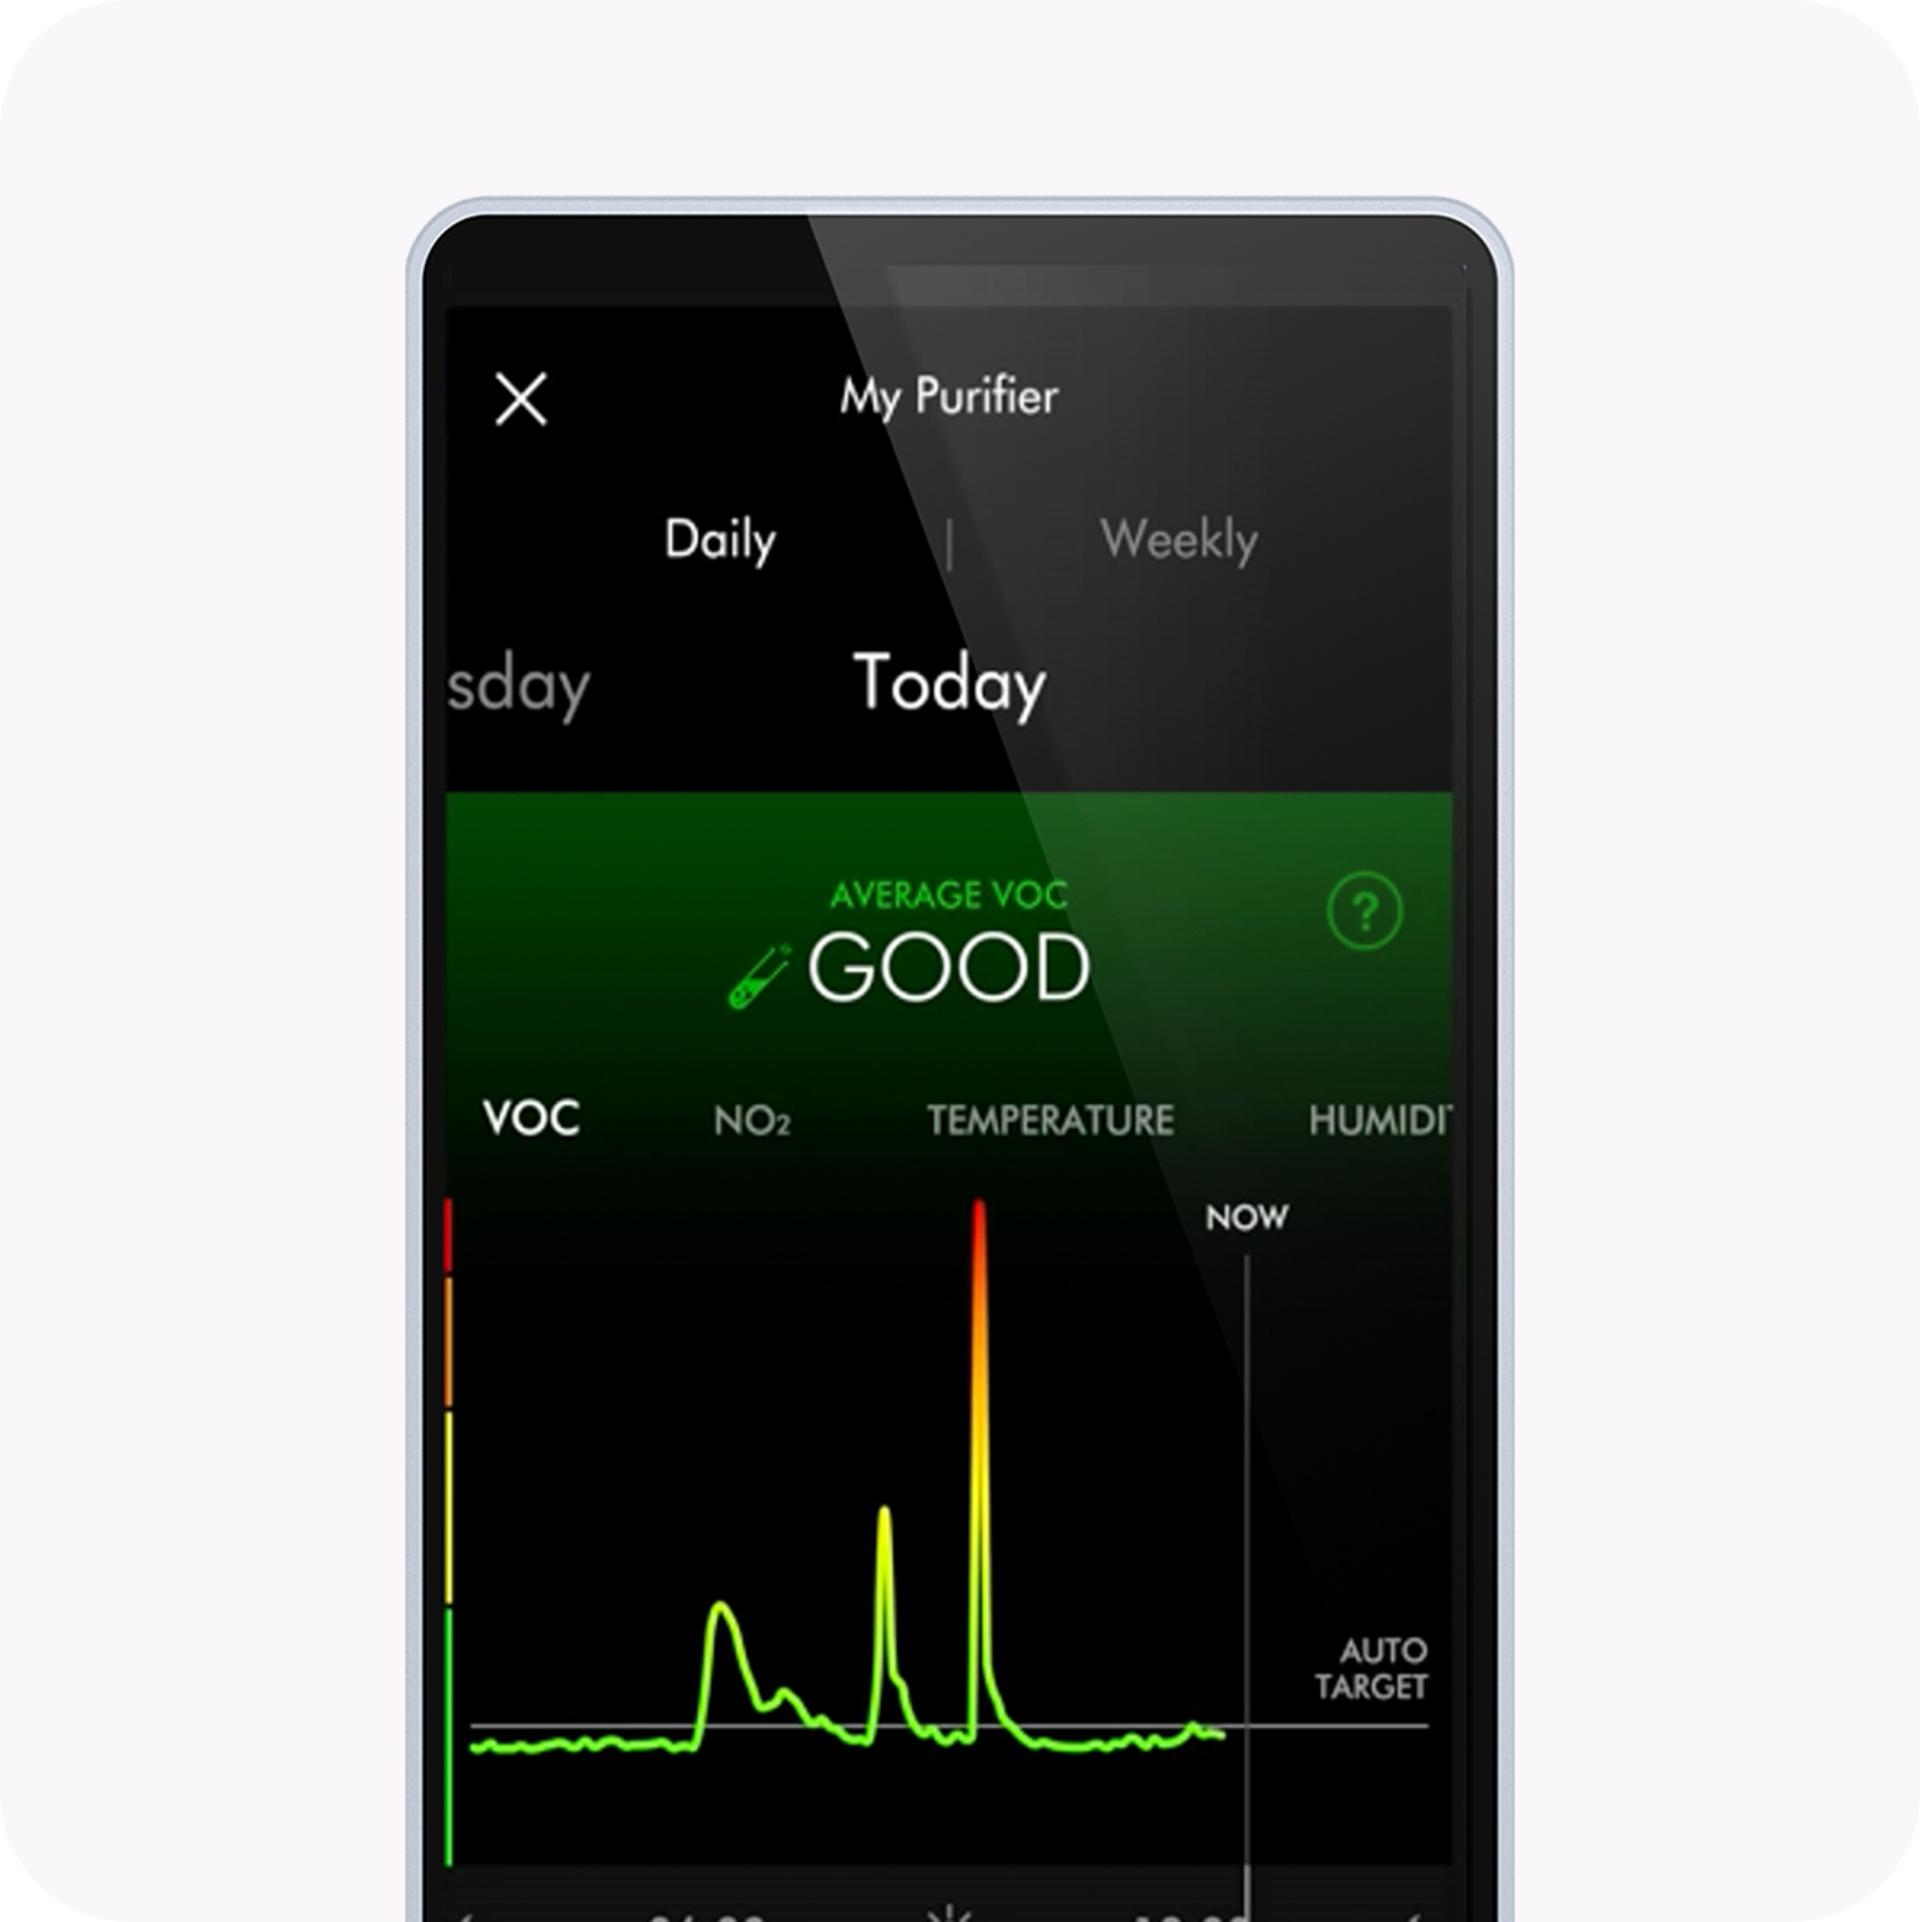 A phone screen showing air quality report, including pollutant levels